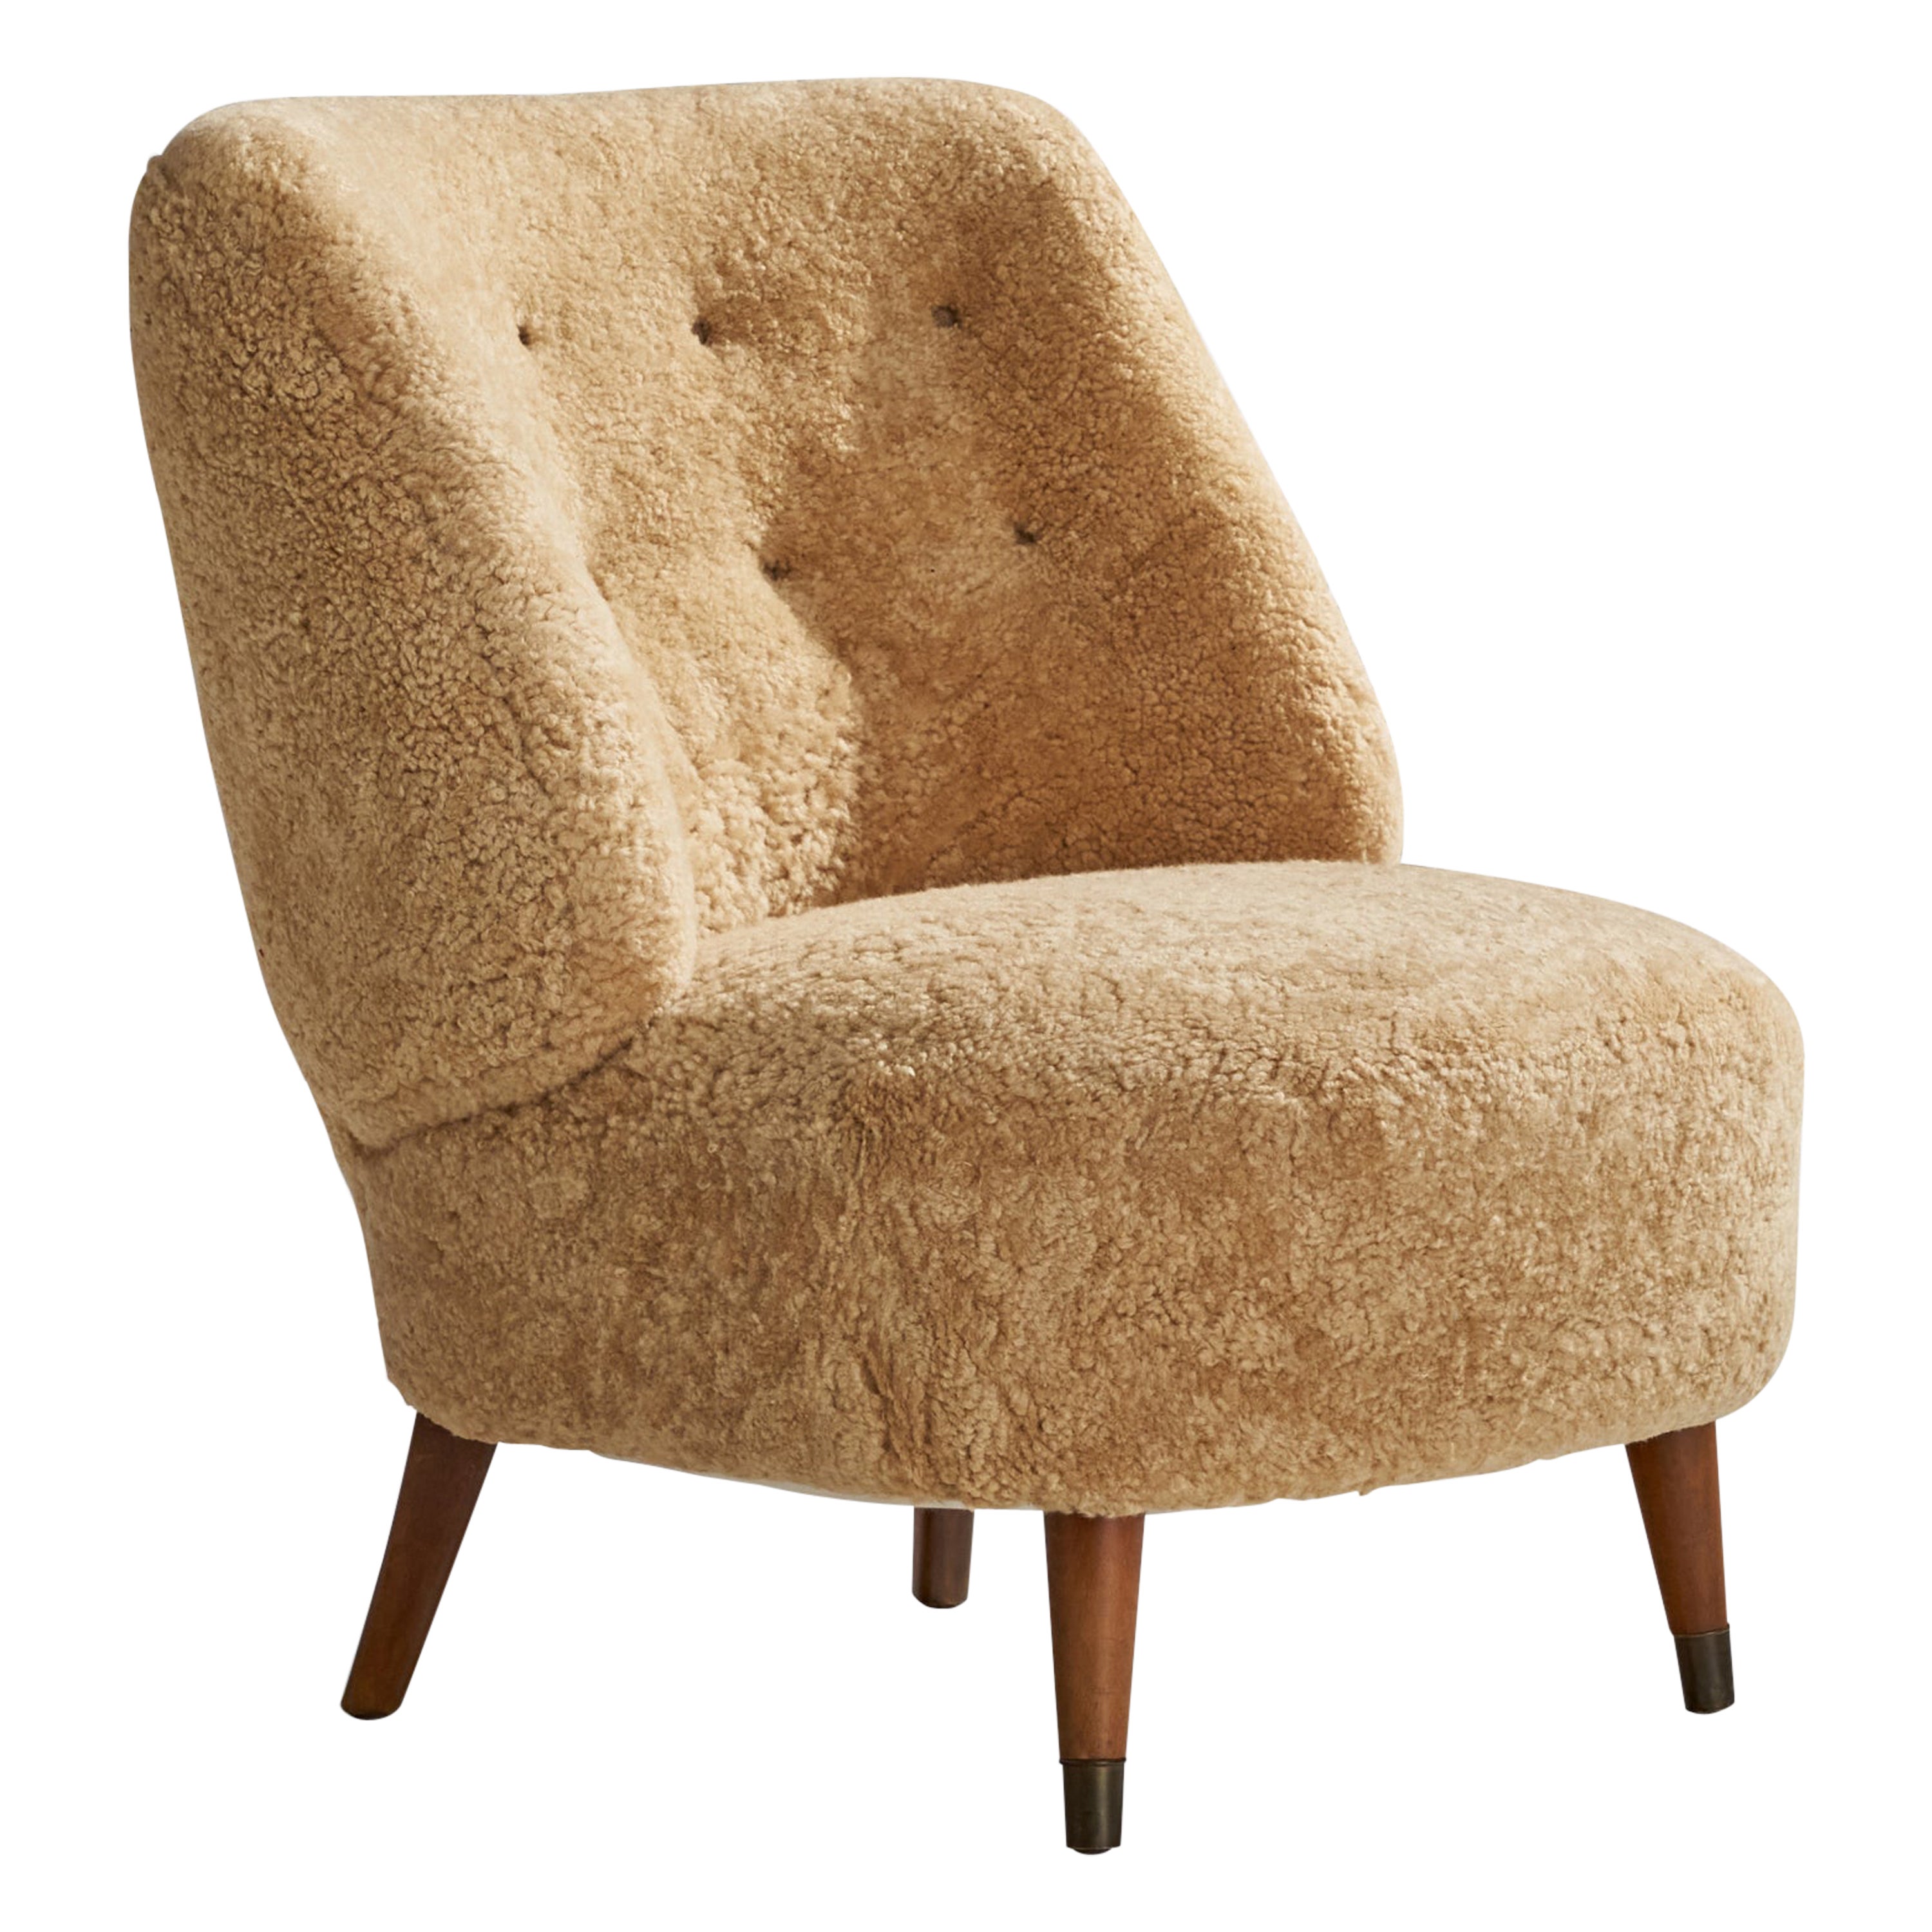 Sven Staaf, Lounge Chair, Shearling, Wood, Sweden, 1940s For Sale